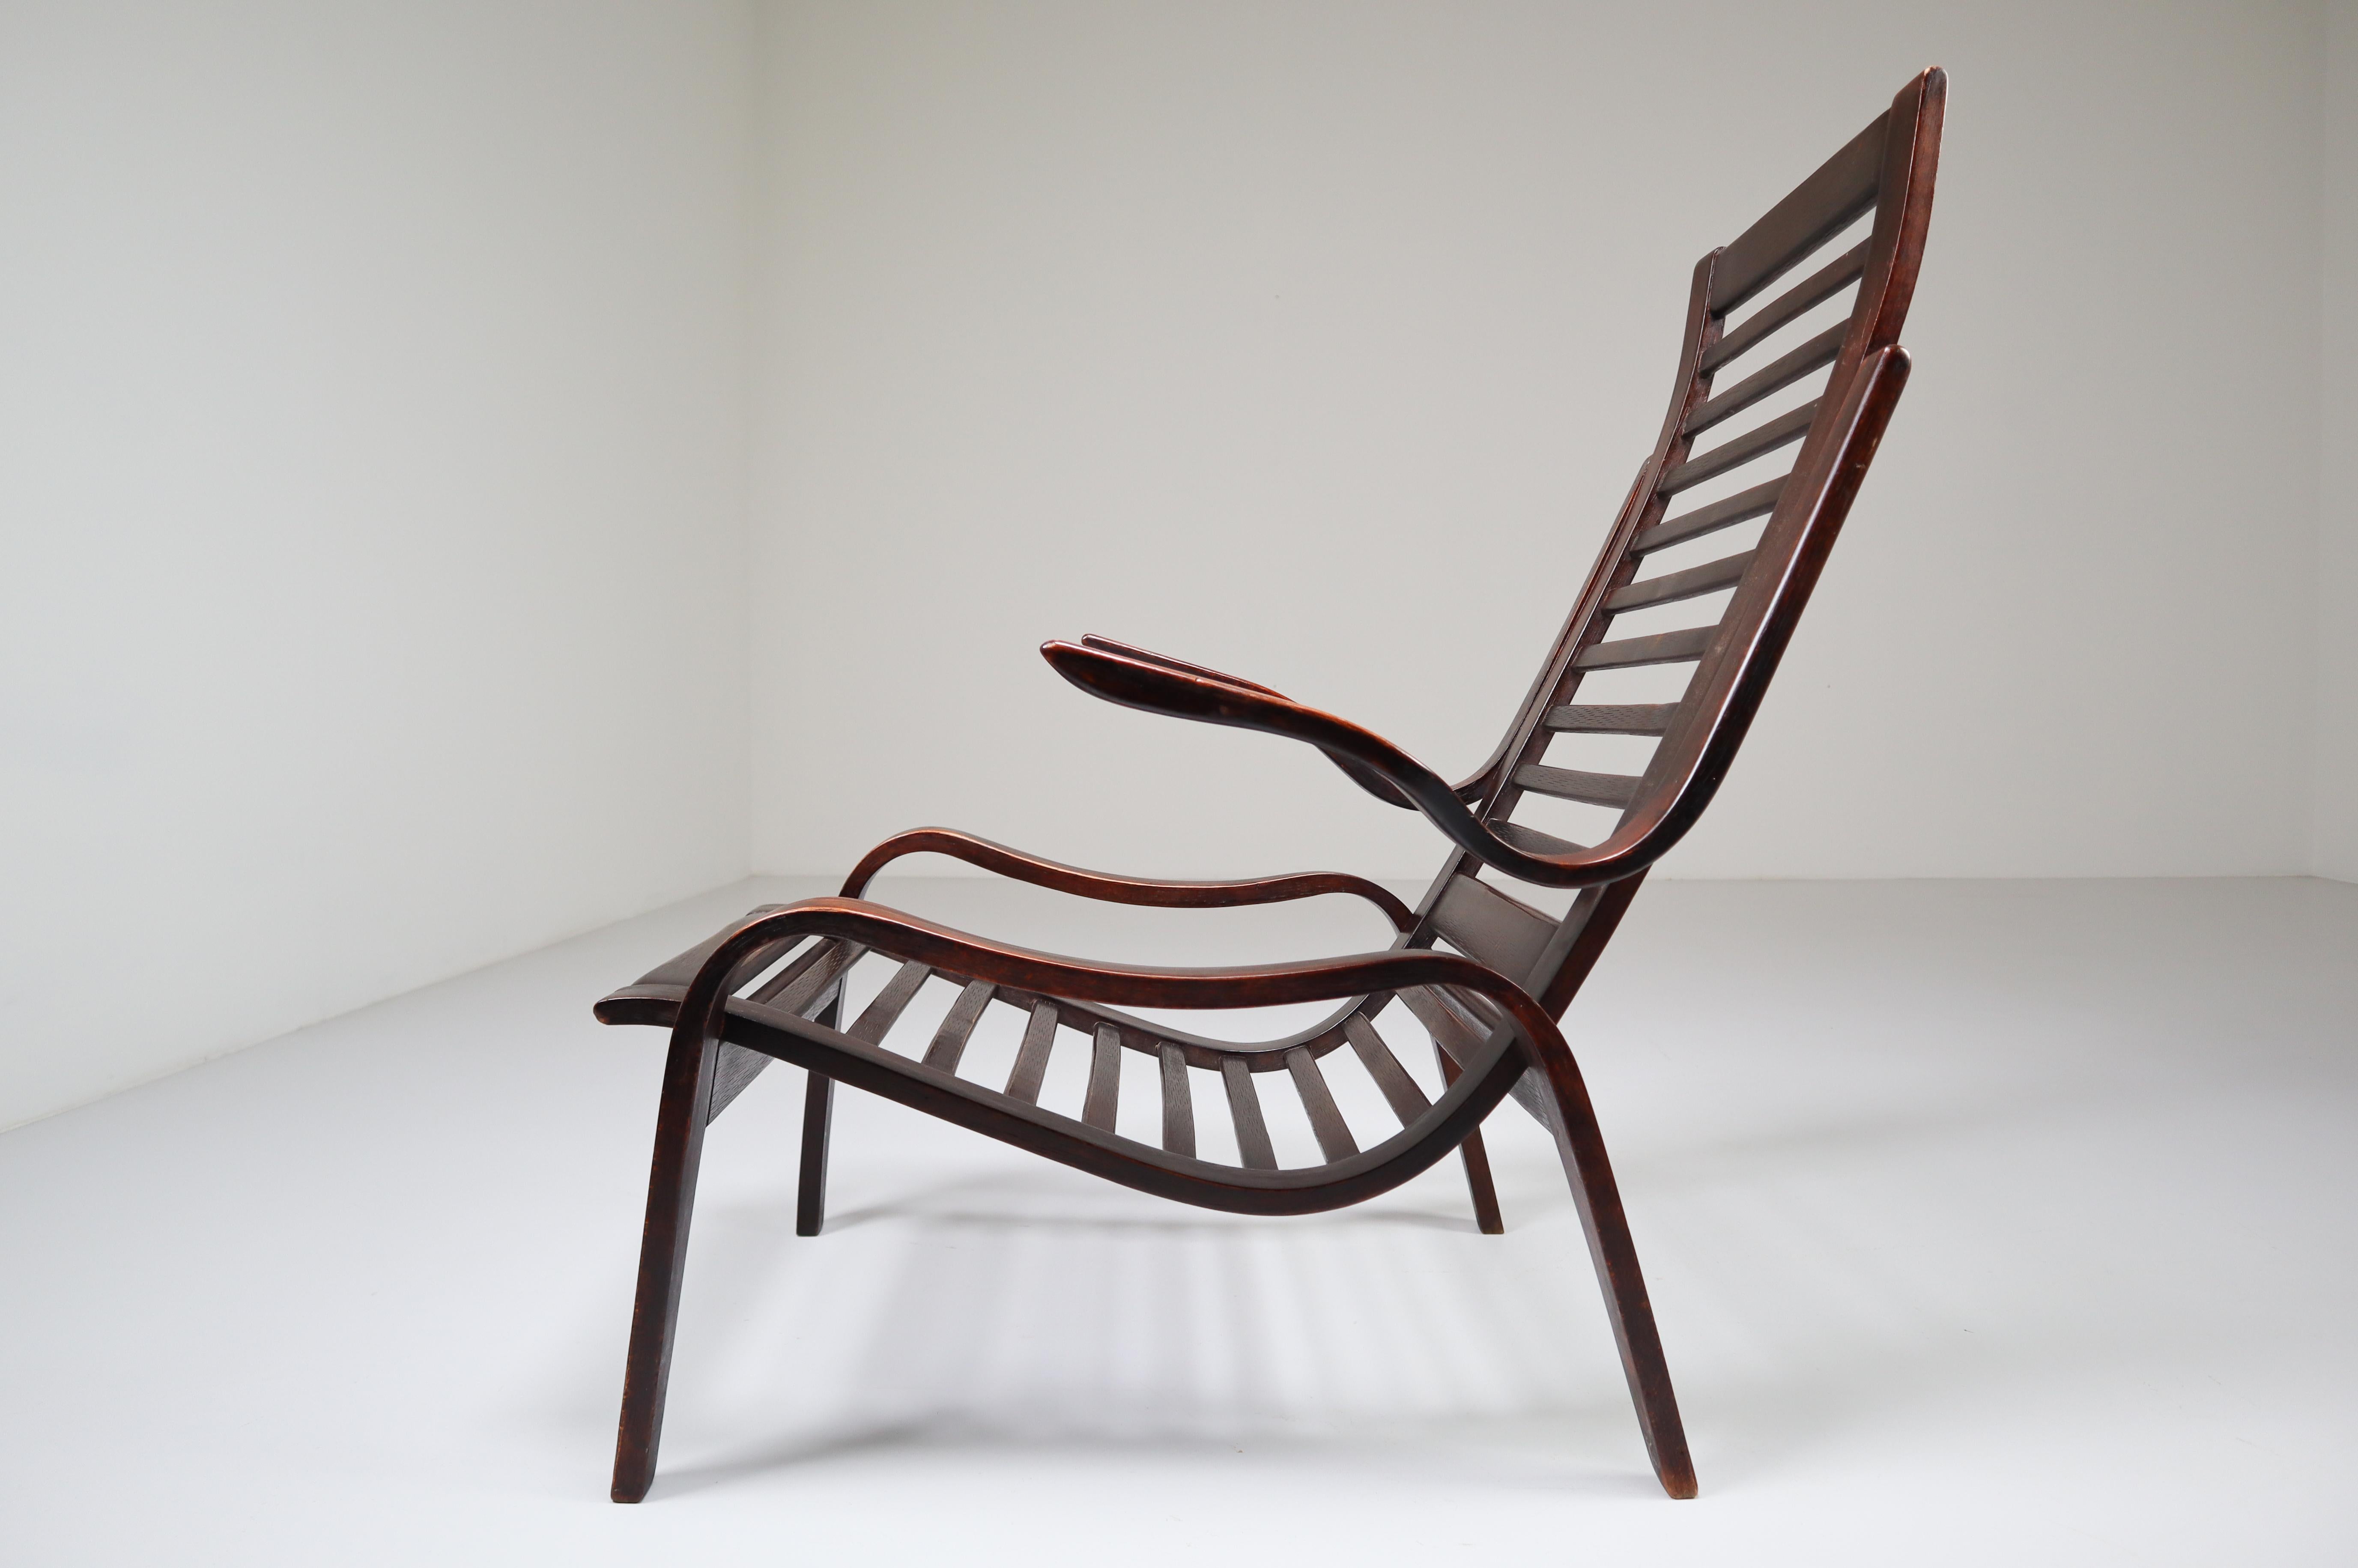 Czech Bentwood Armchairs Designed by Jan Vanek for UP Zavodny in the 1930s